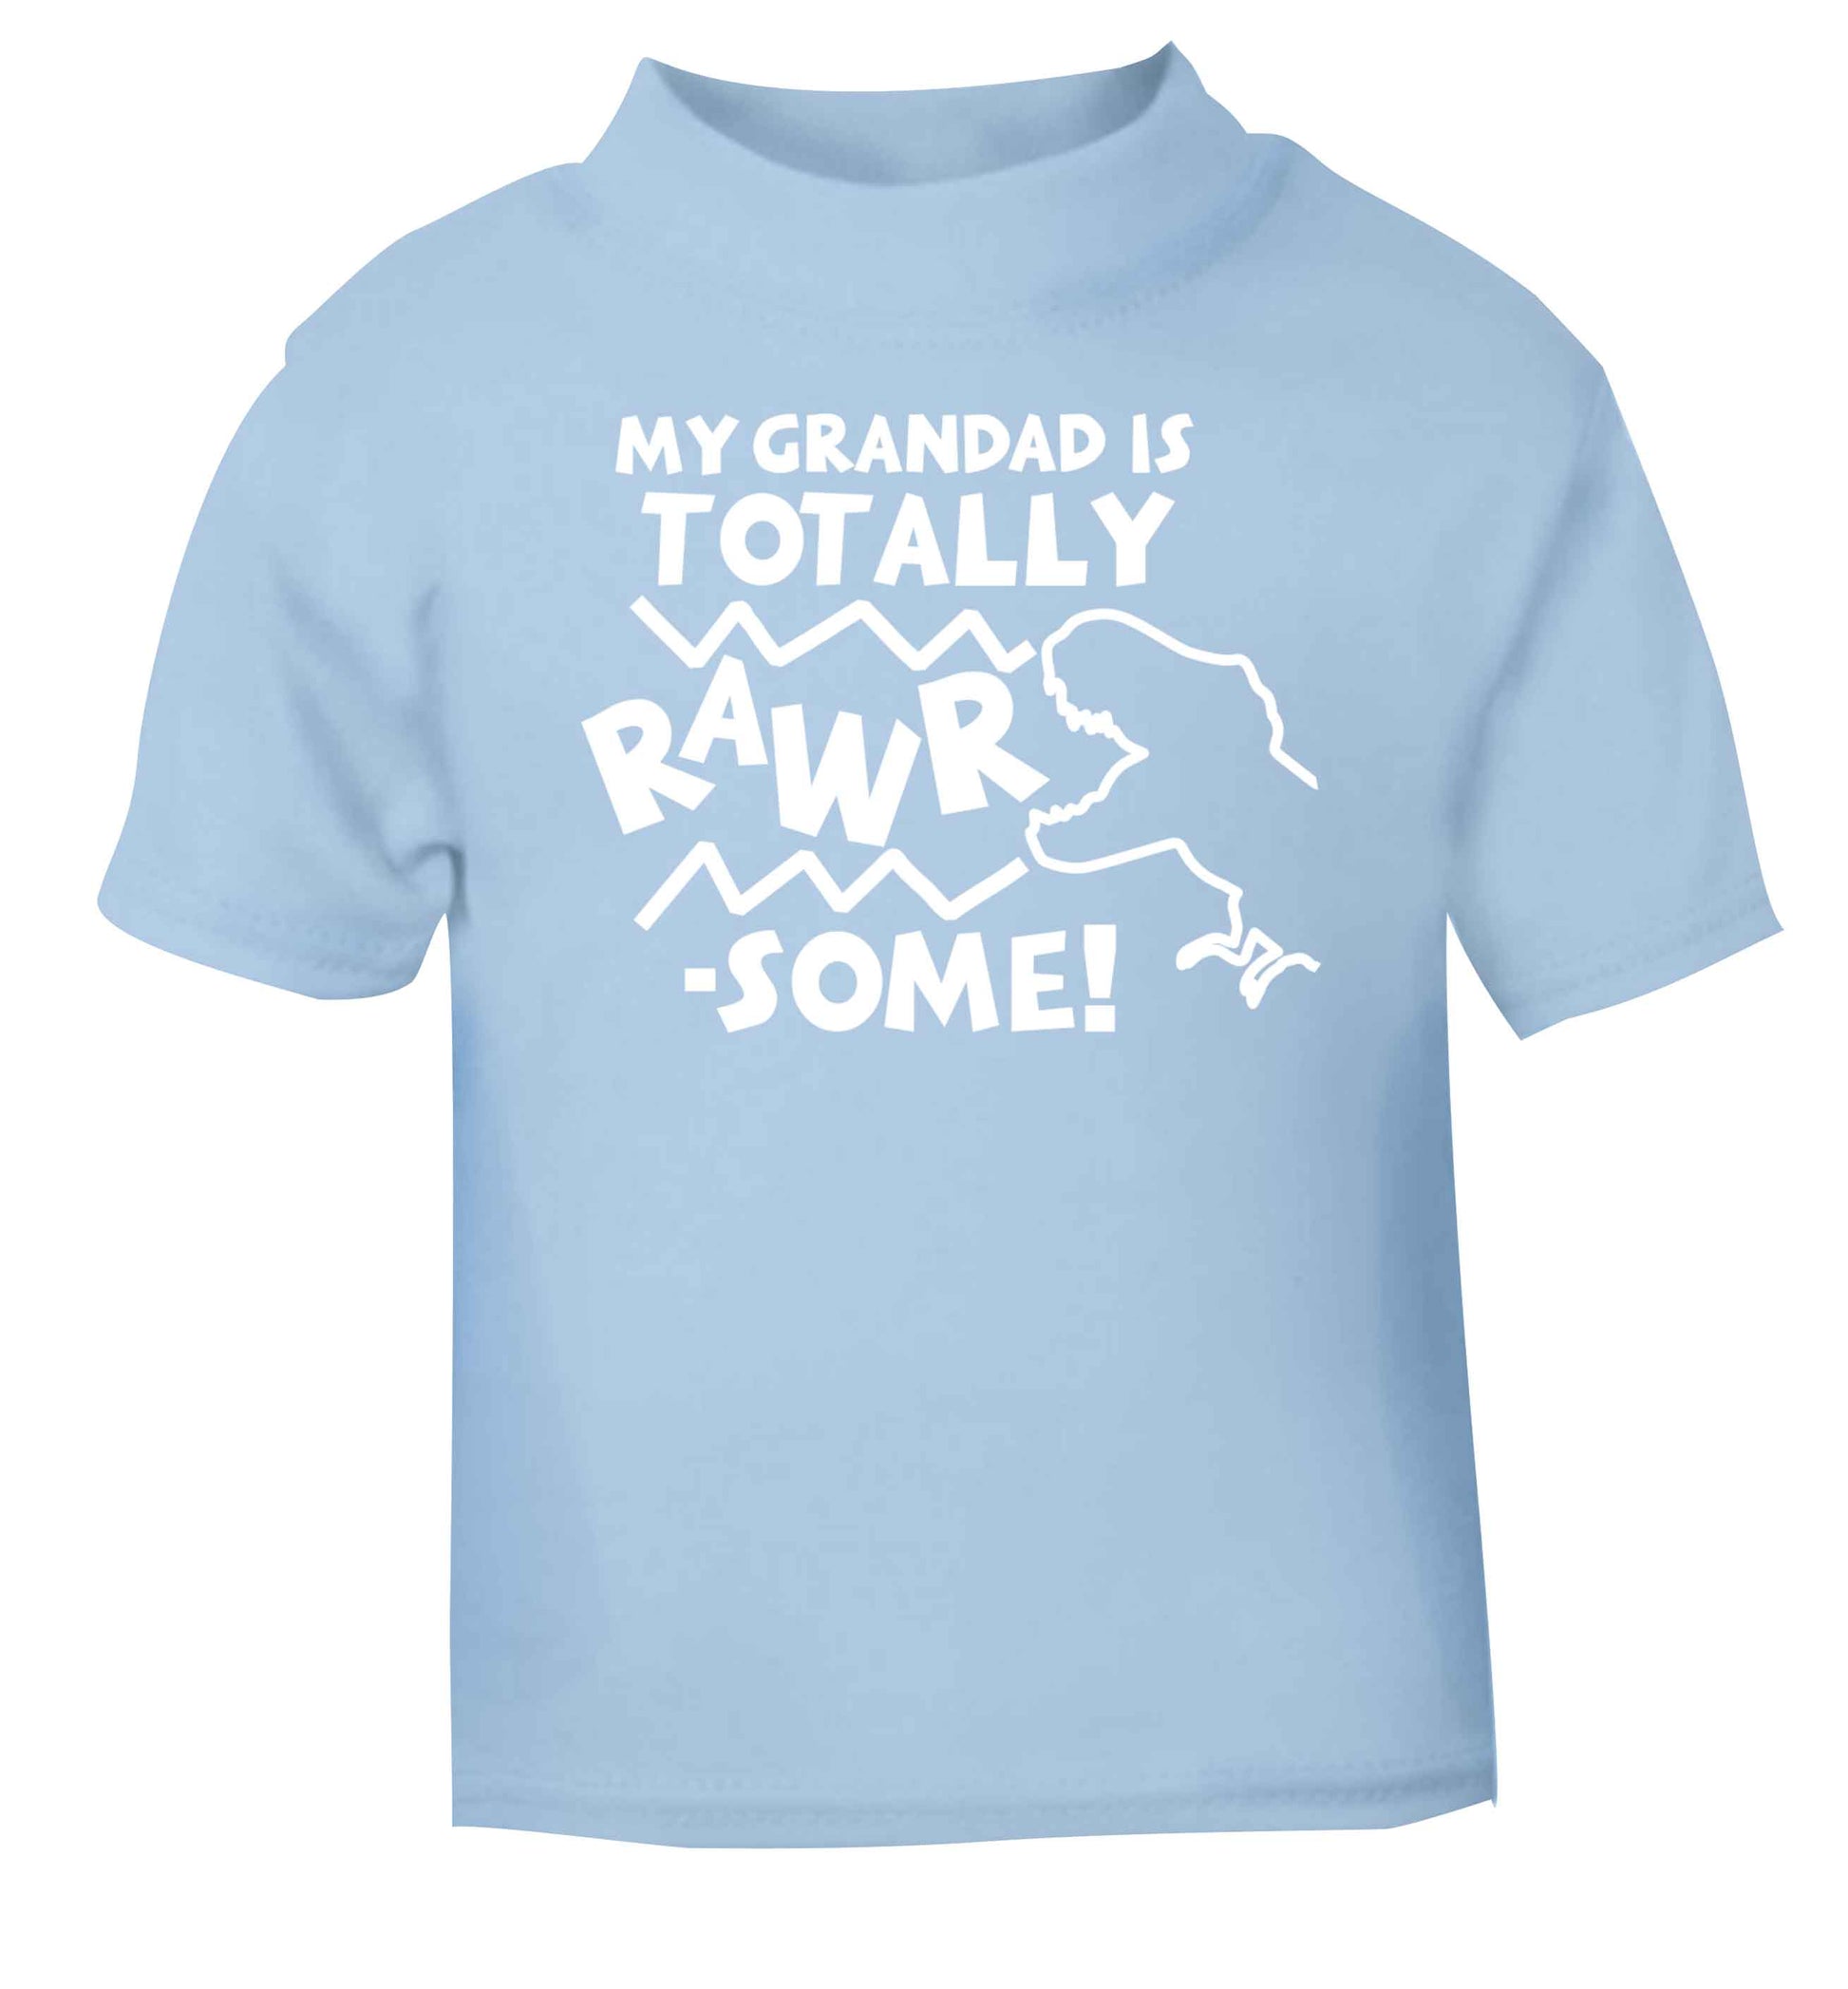 My grandad is totally rawrsome light blue baby toddler Tshirt 2 Years